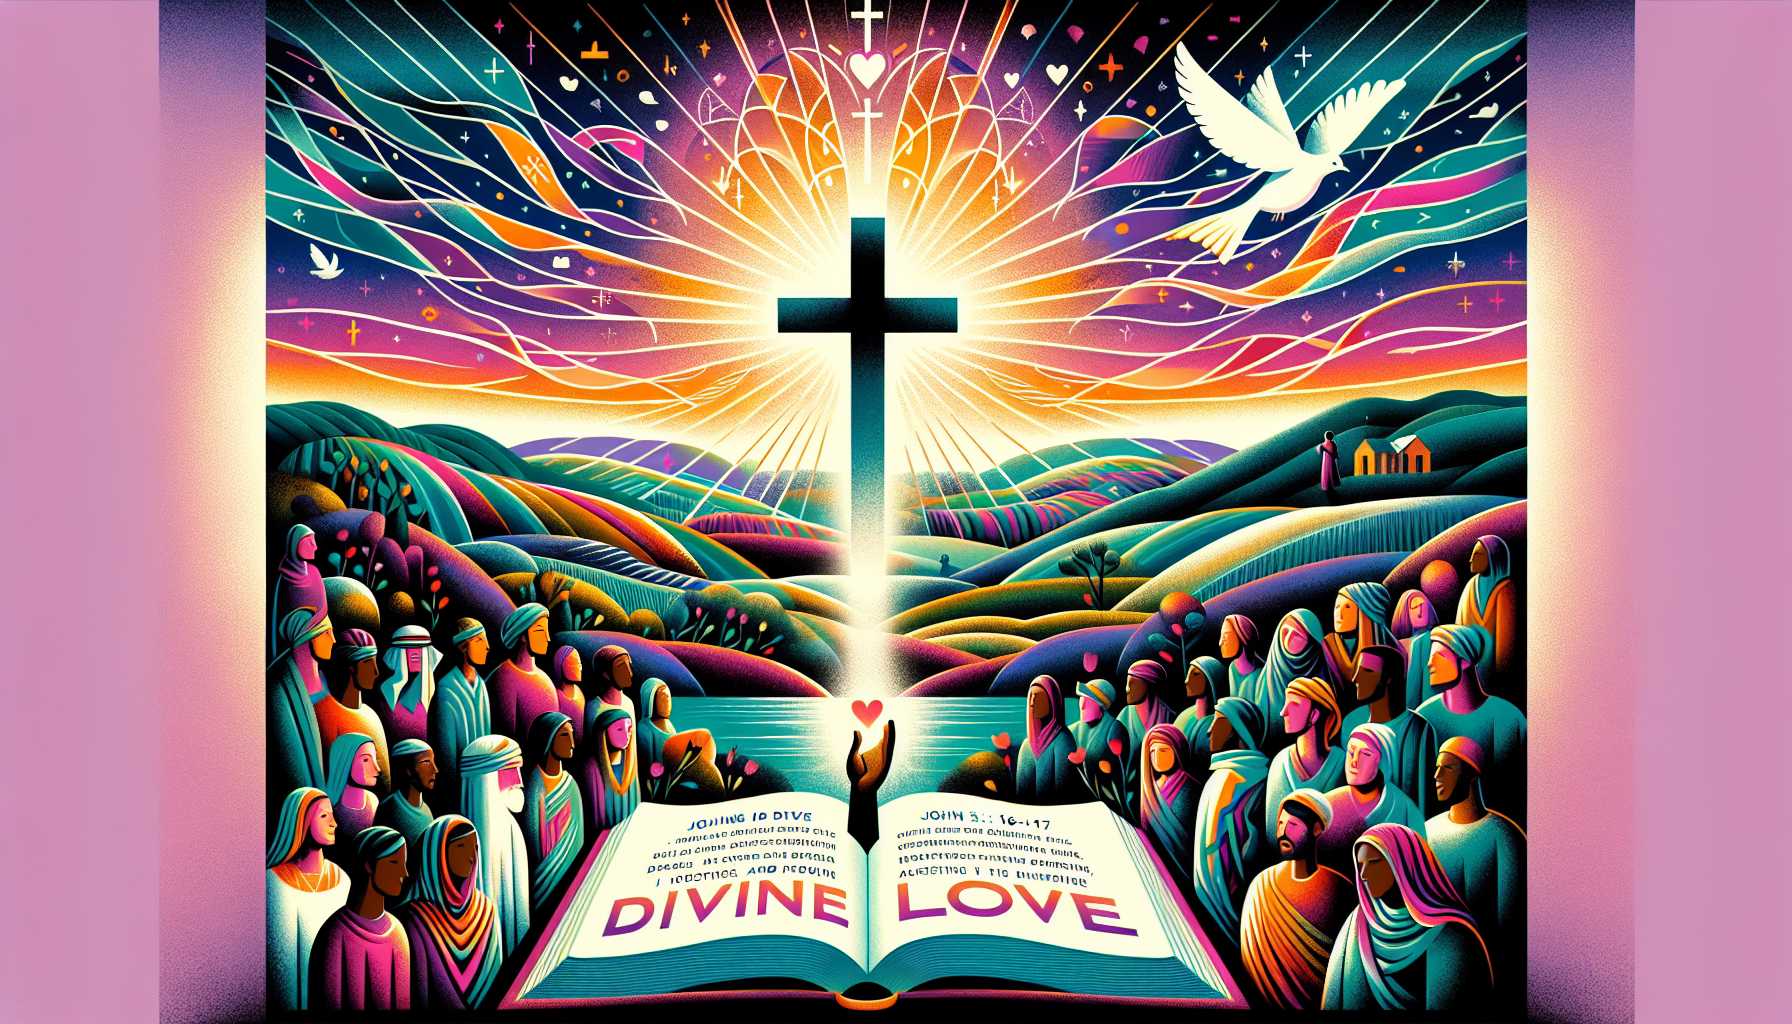 Create an illustration that captures the essence of 'El Amor de Dios' with a focus on John 3:16-17. The image should feature a serene landscape with a prominent cross at the center, symbolizing Jesus'